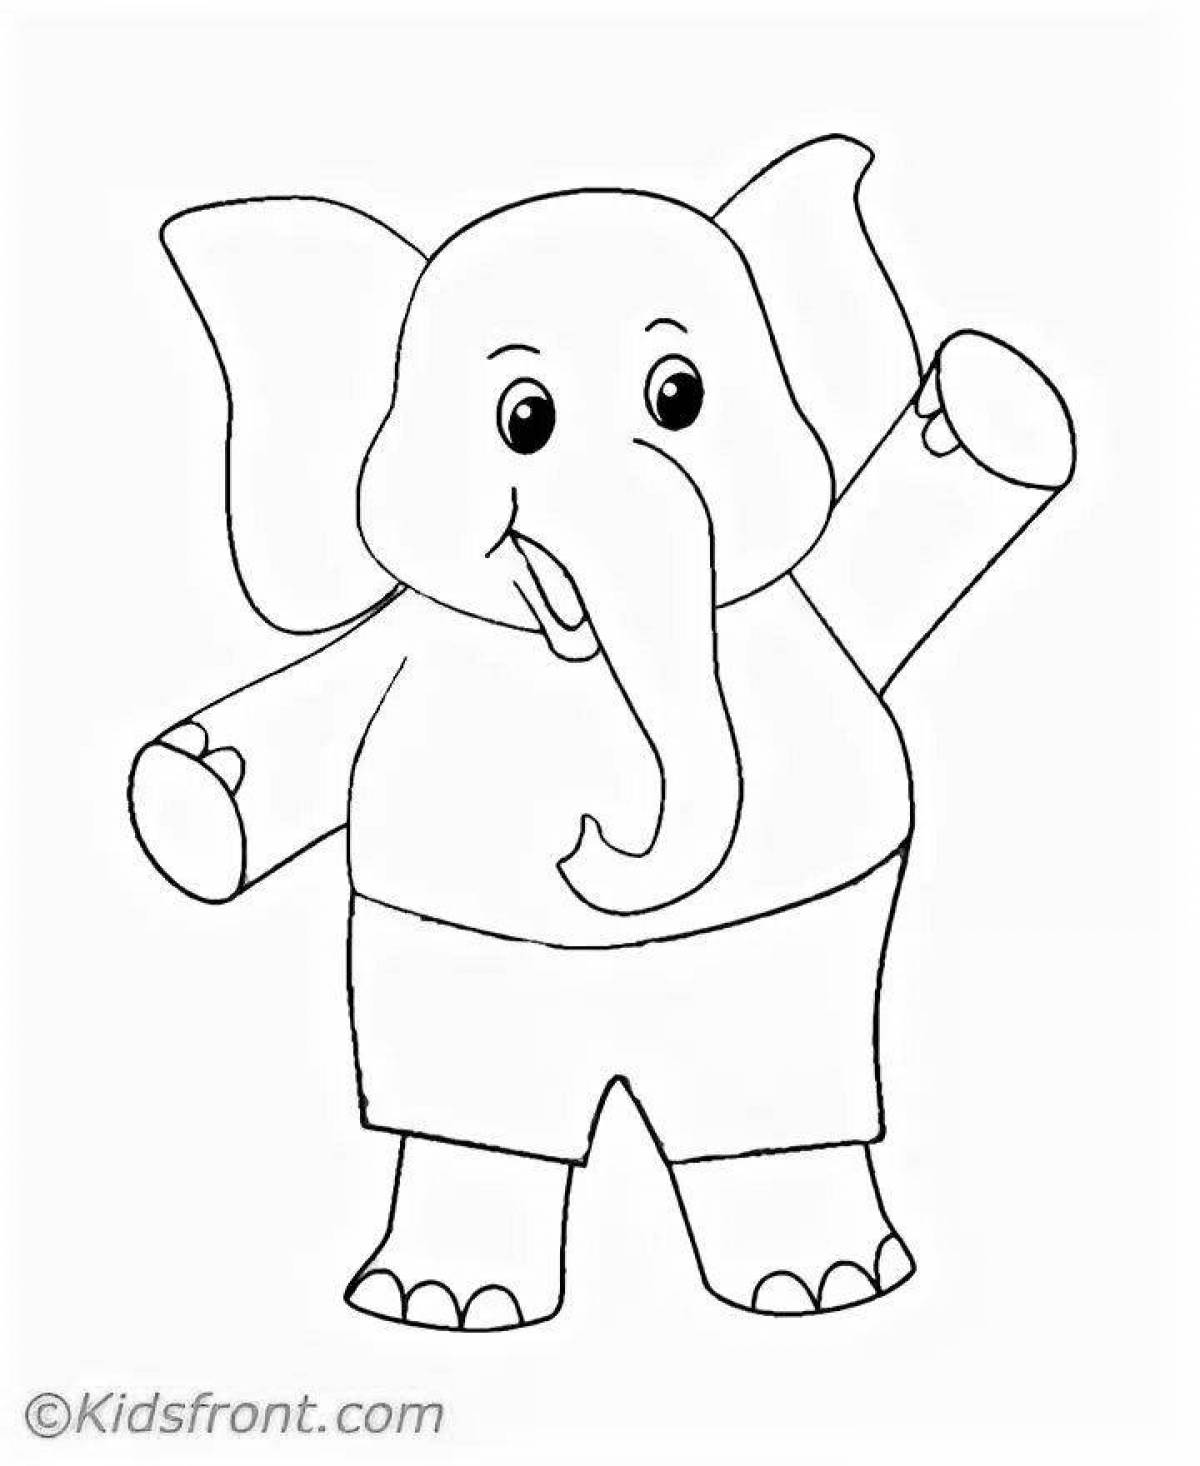 Great elephant coloring book for 3-4 year olds